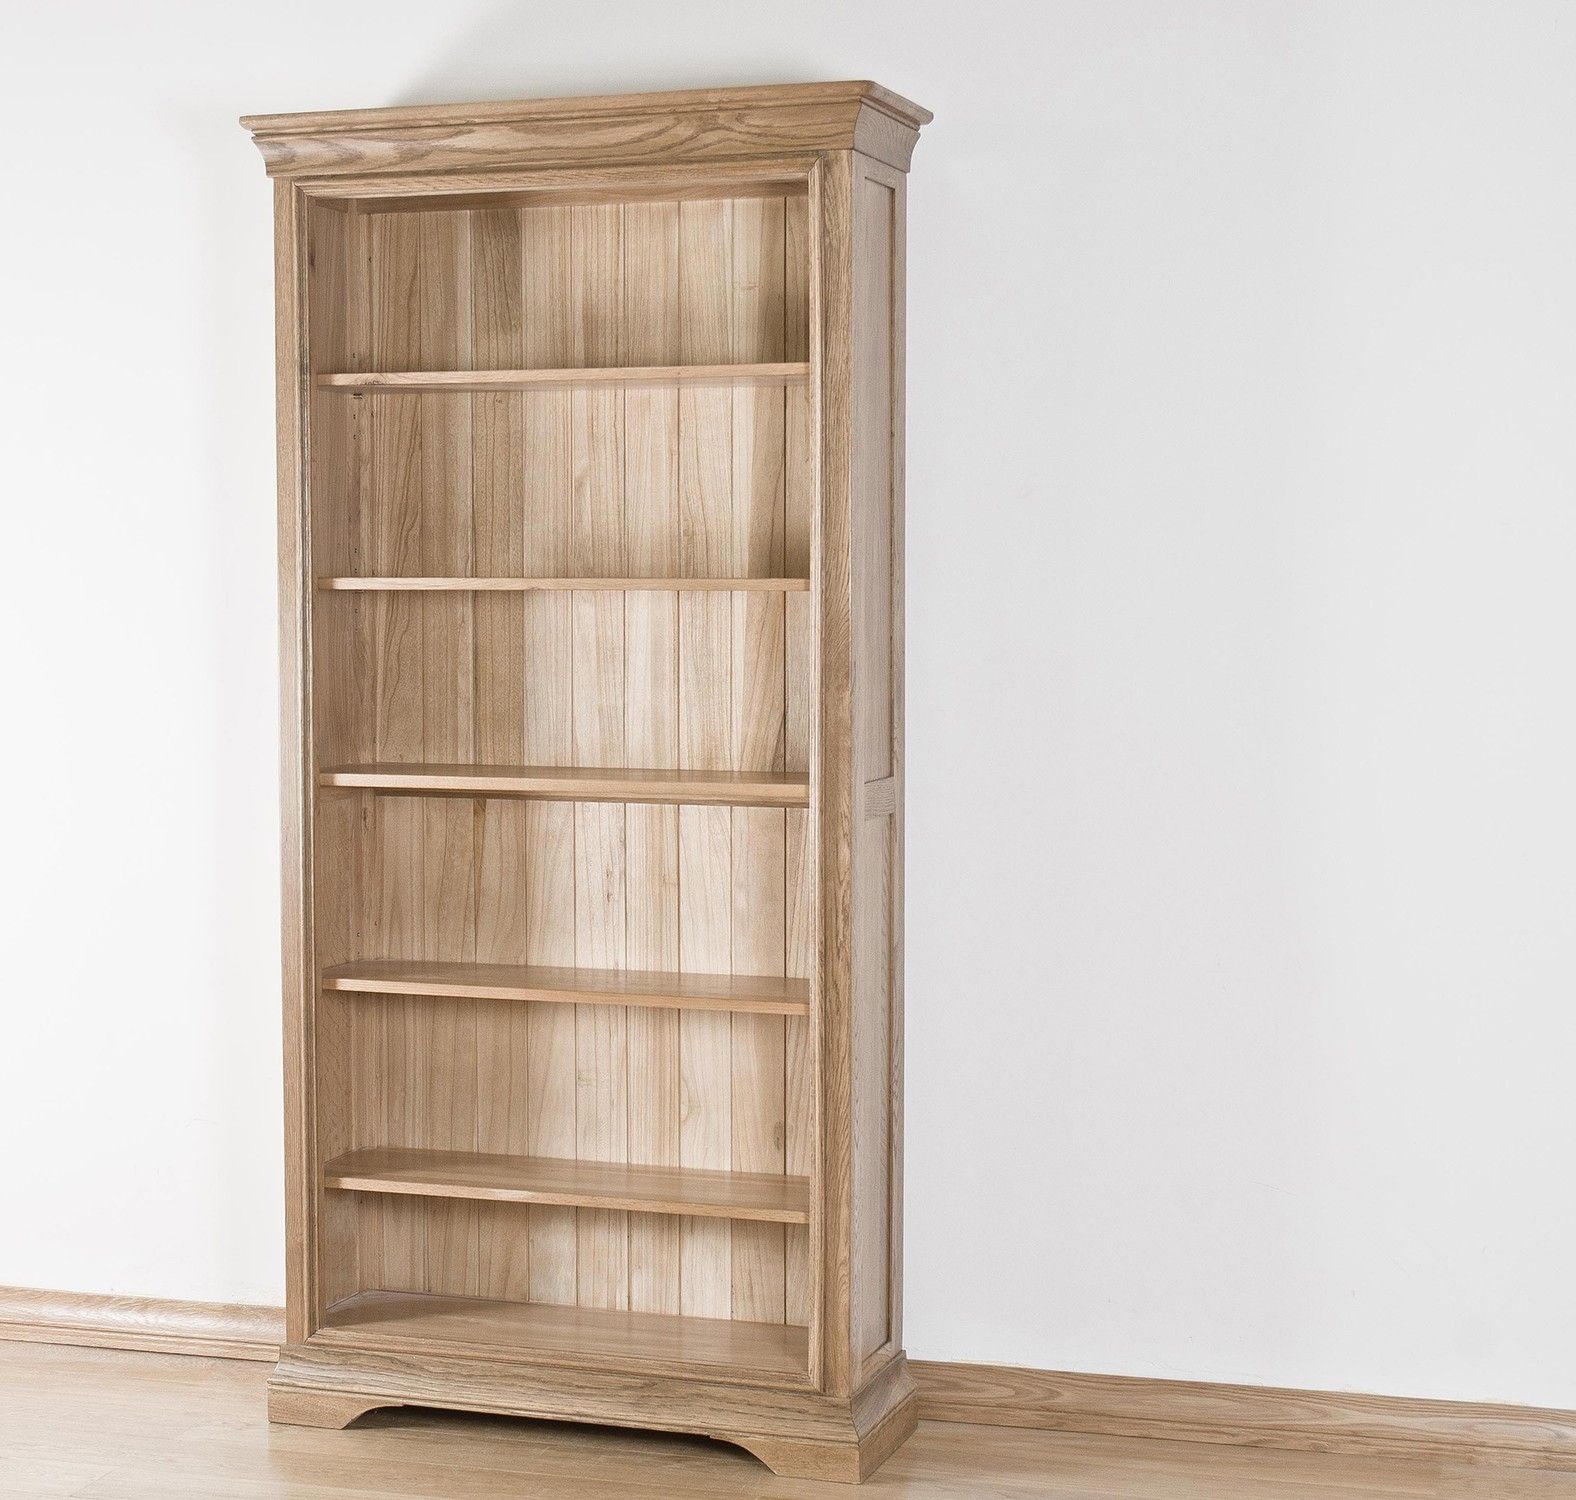 Solid Oak Bookcases In Seven Sizes Roselawnlutheran With Regard To Solid Oak Bookcase (View 6 of 15)